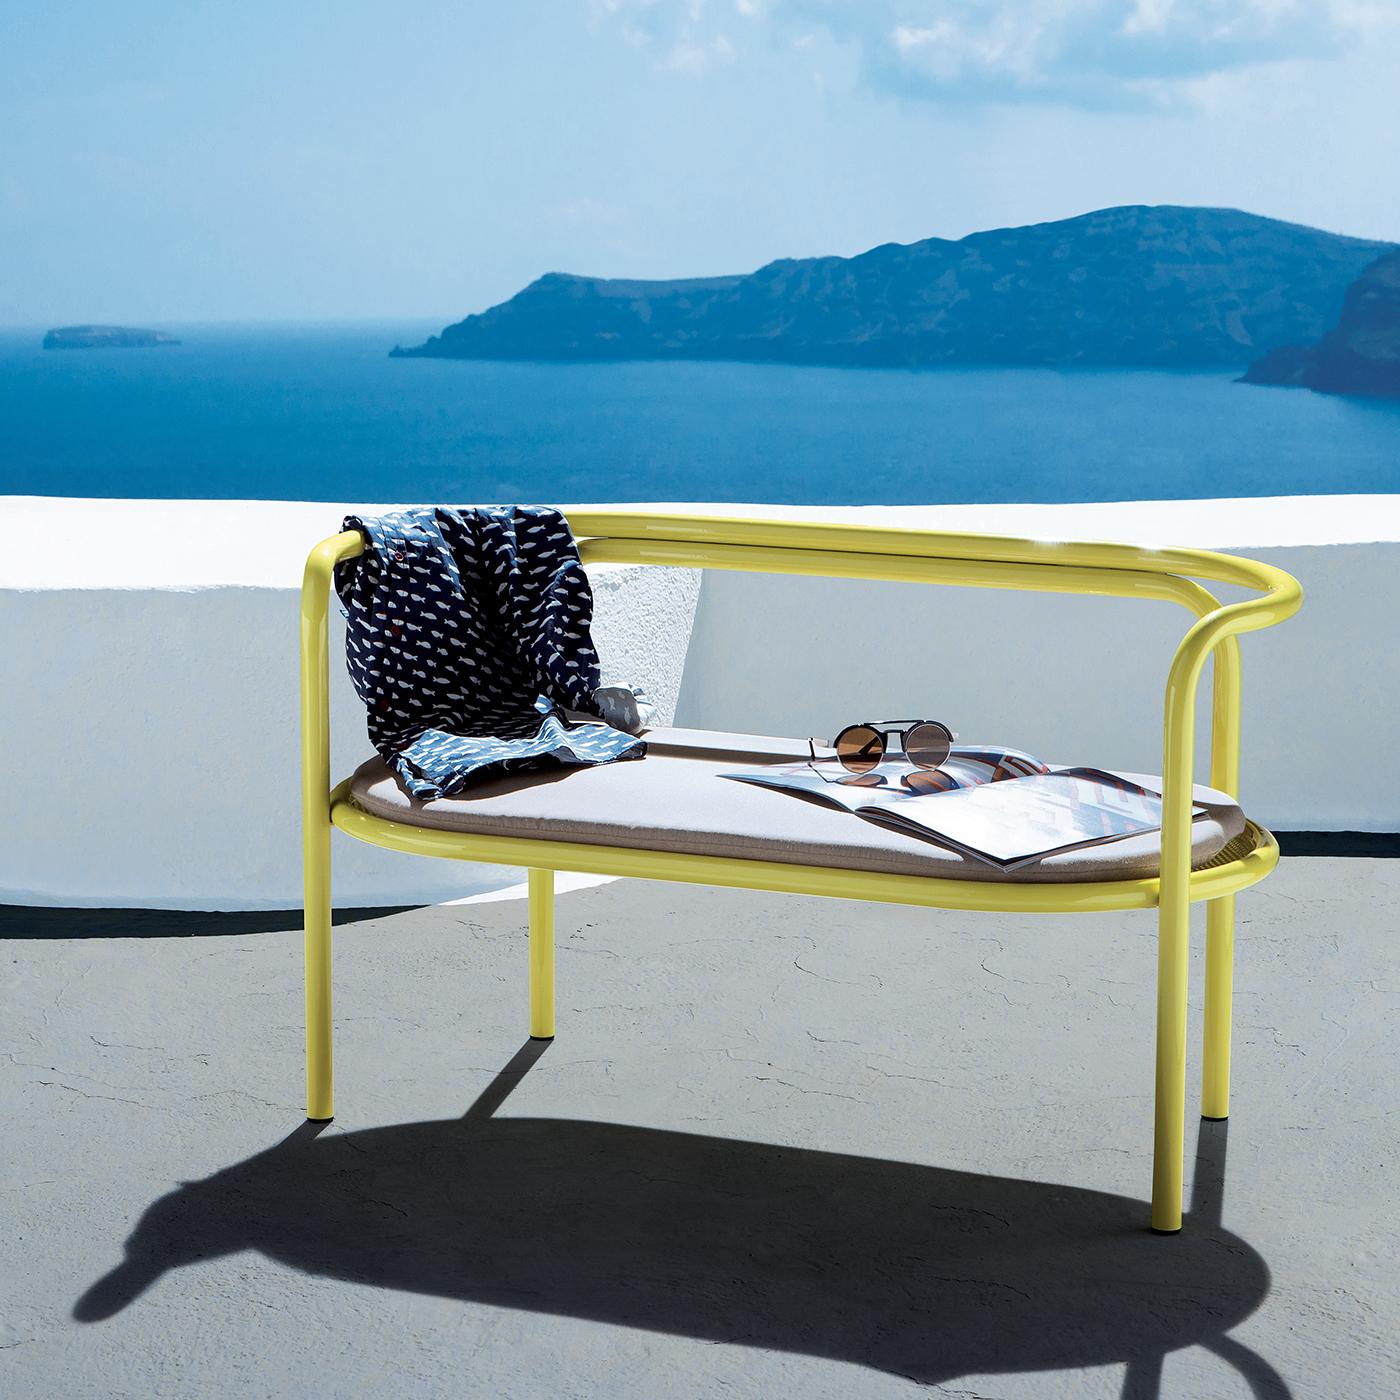 Part of a complete outdoor collection designed by Italian architect Gae Aulenti in 1964 and re-introduced by Exteta in 2016, this striking loveseat is characterized by a simple silhouette imbued with bold chromatic aesthetic qualities. The bright